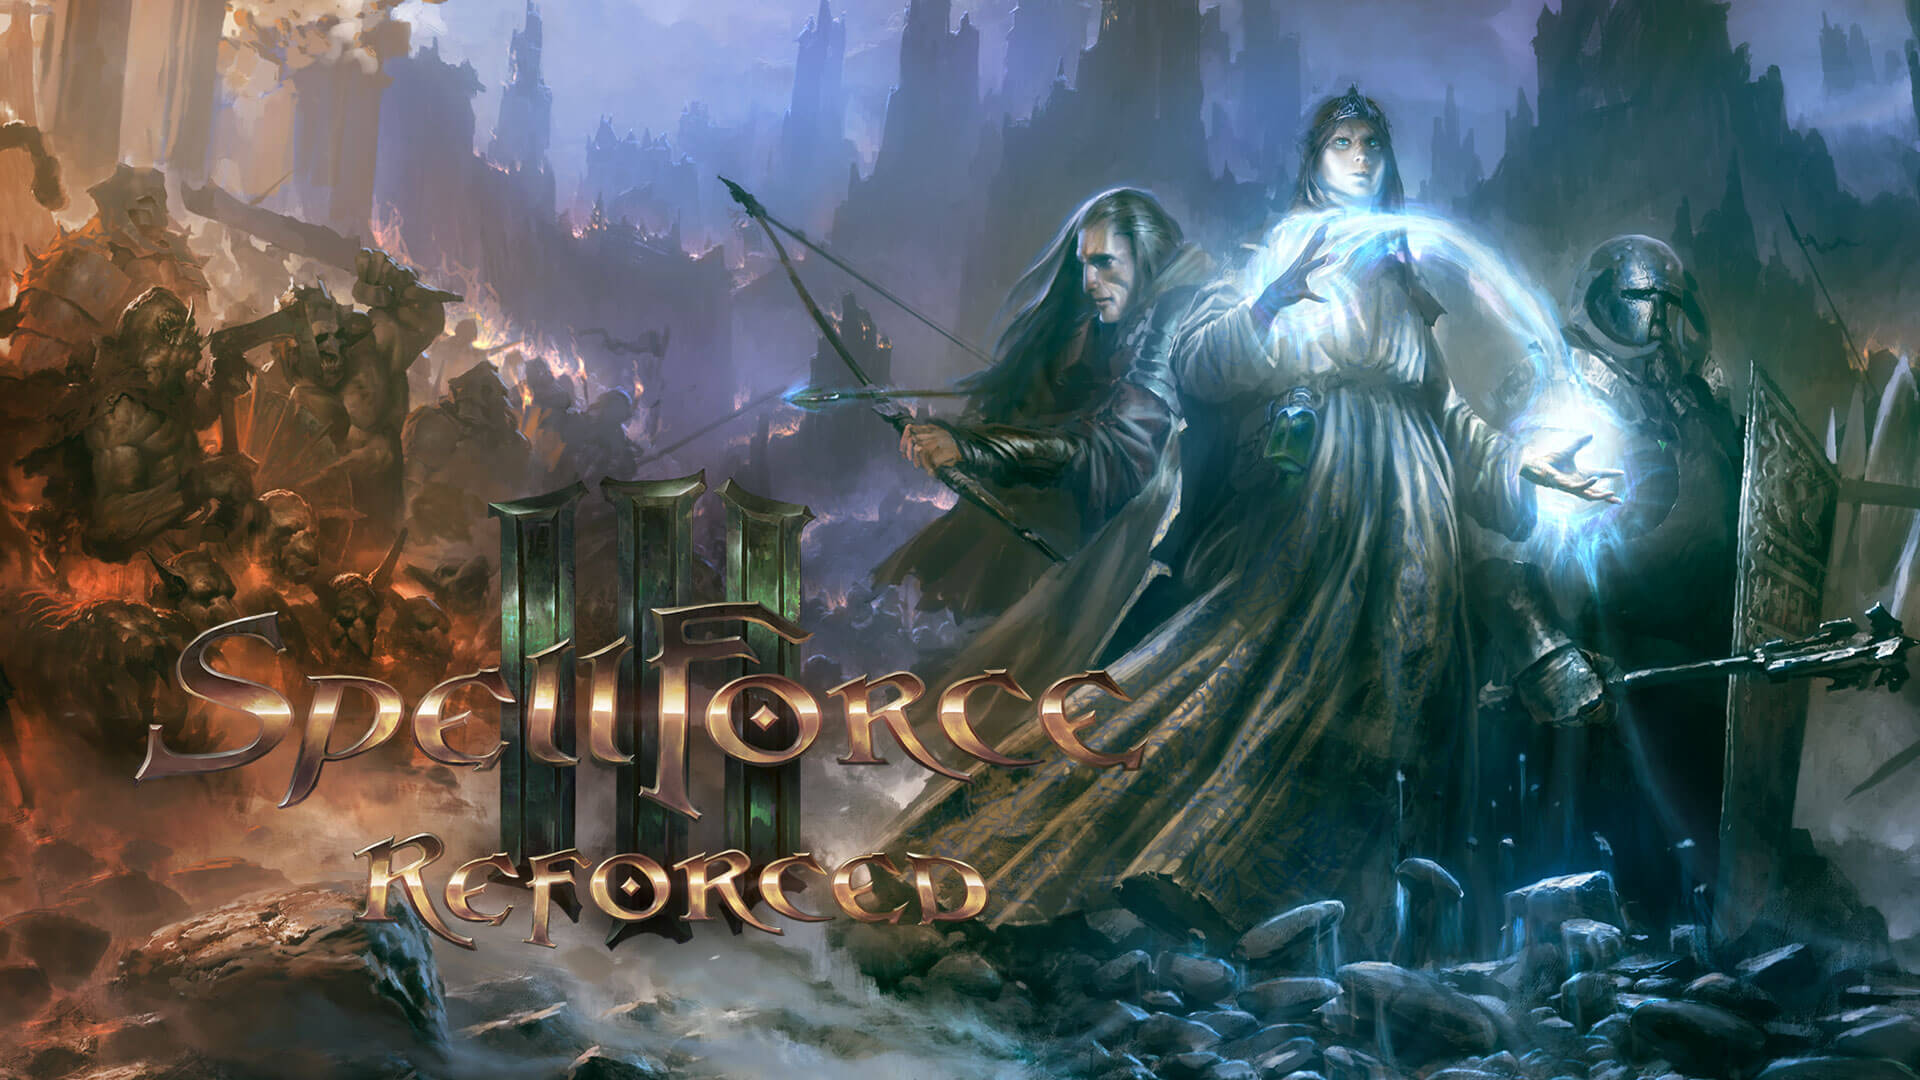 spellforce 3 reforced ps5